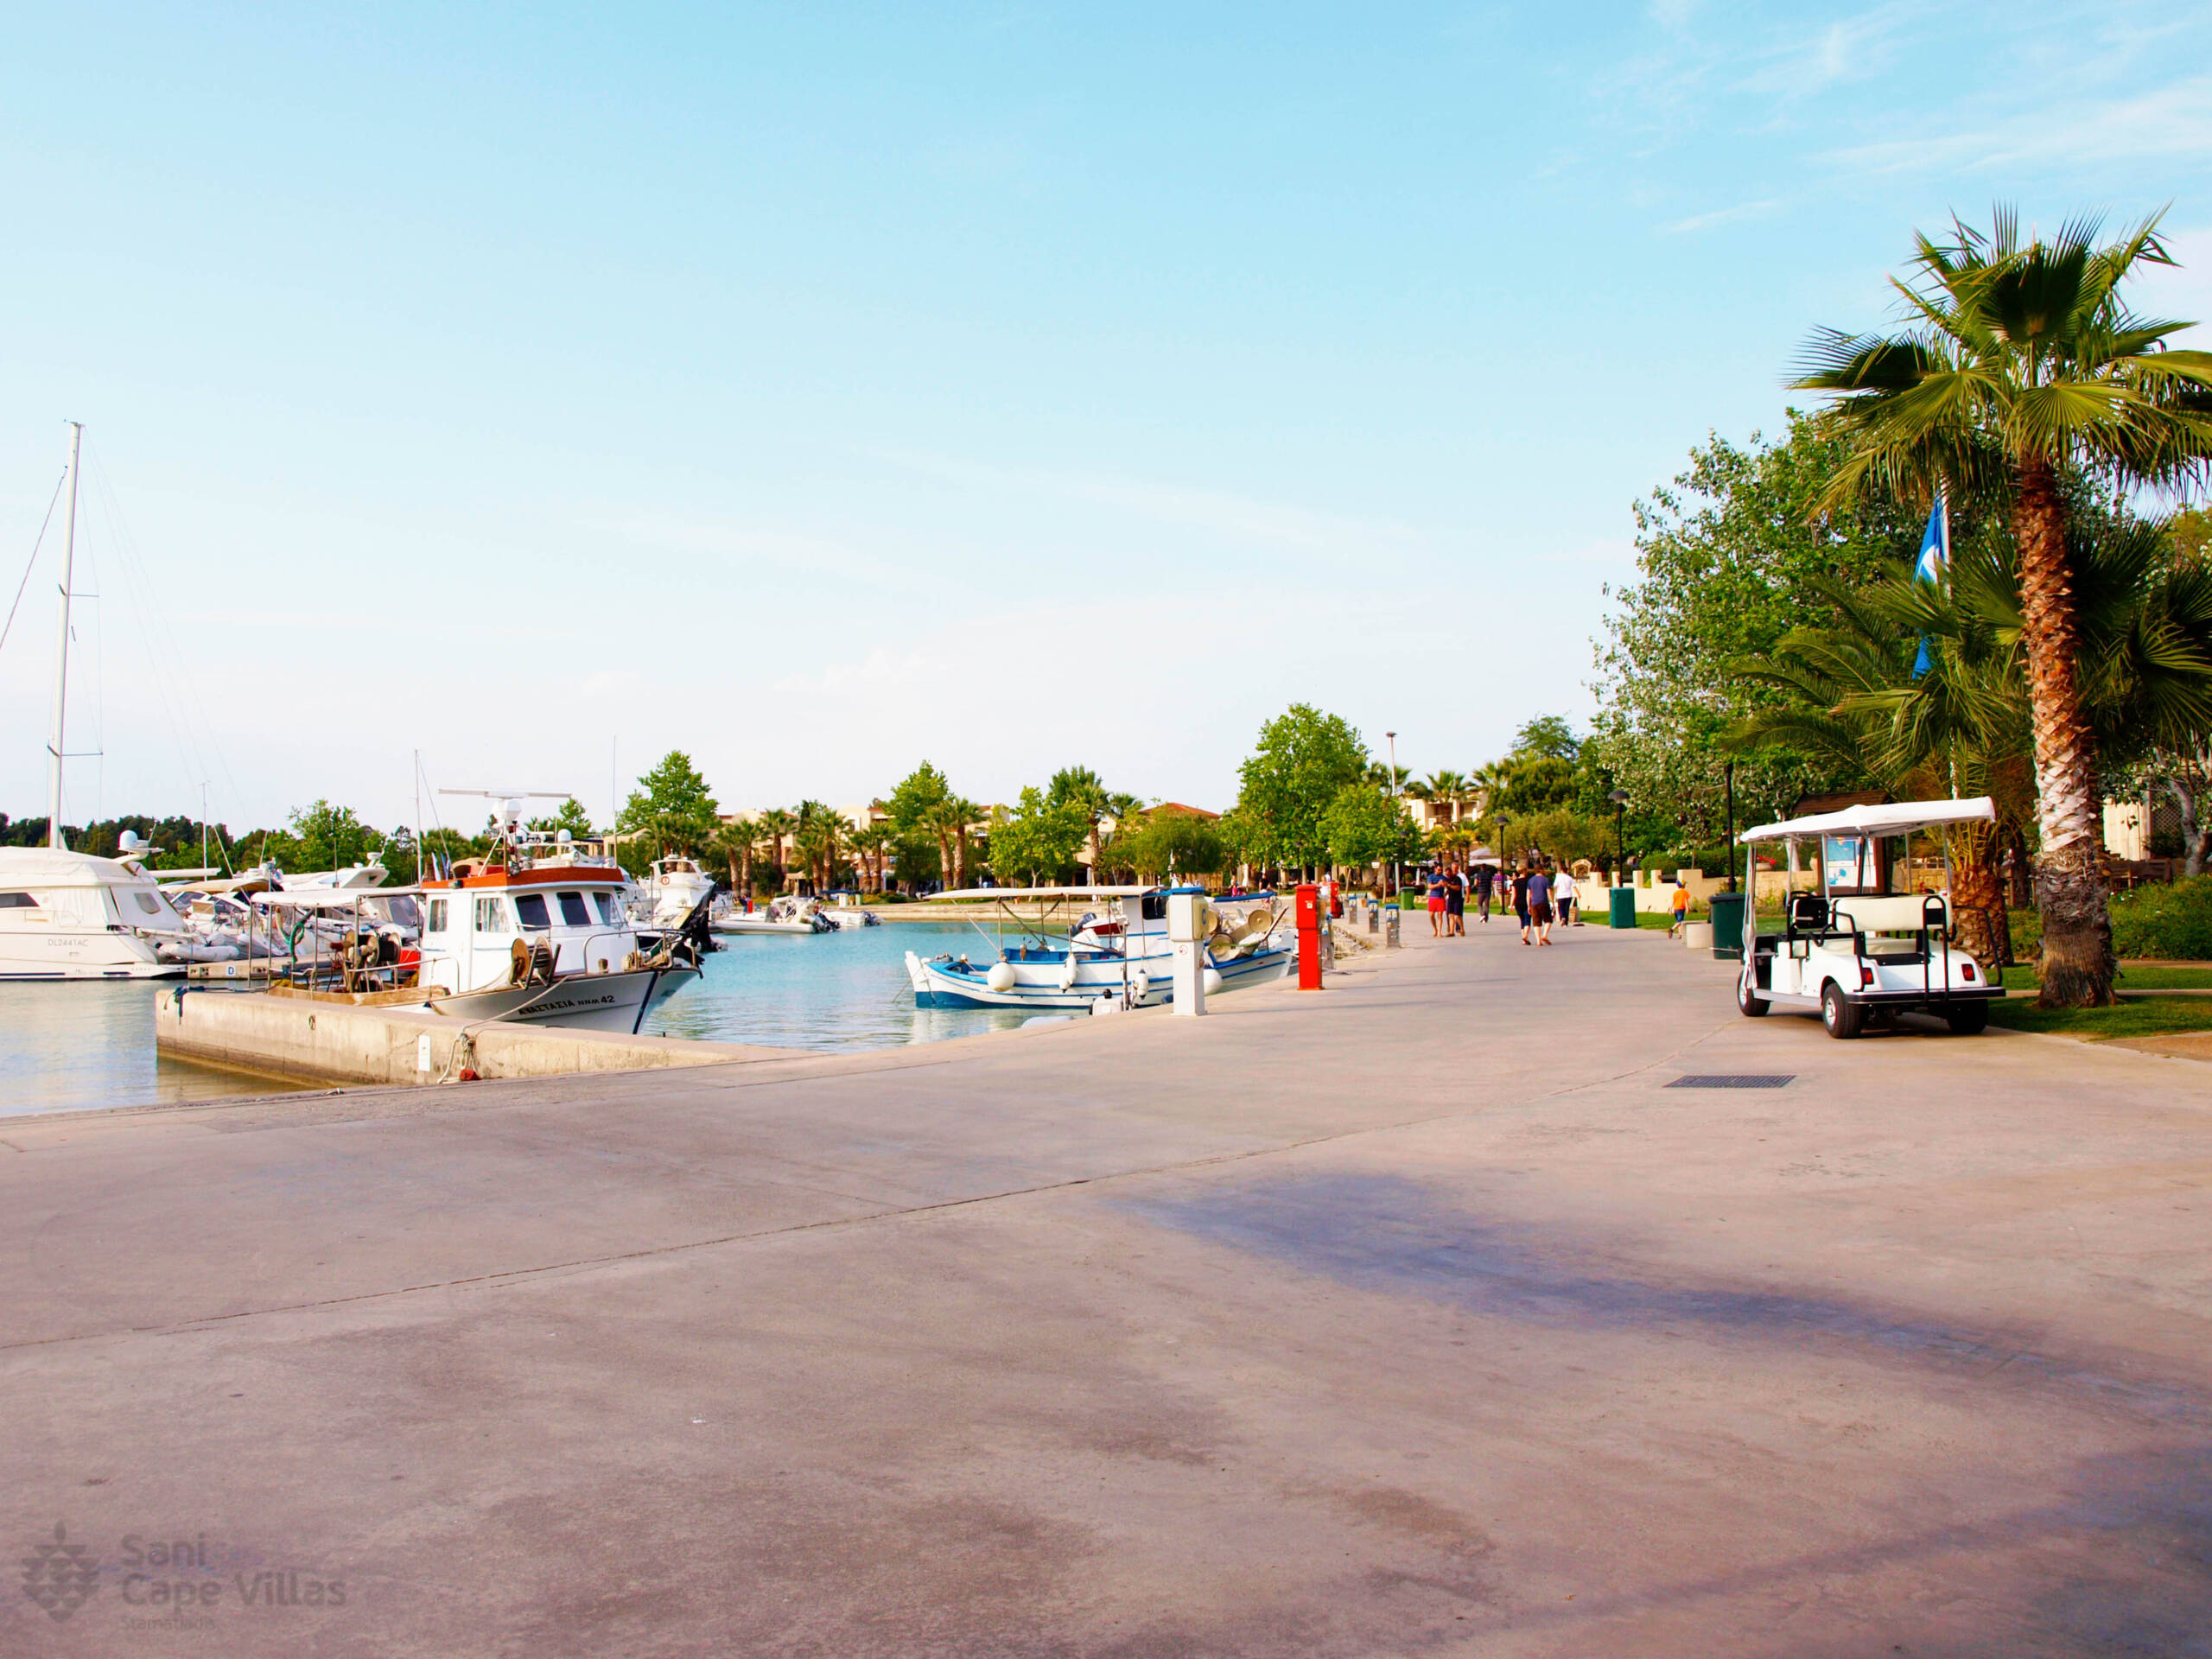 Sani Marina with moored boats, people walking the promenade and palm trees are located along the way